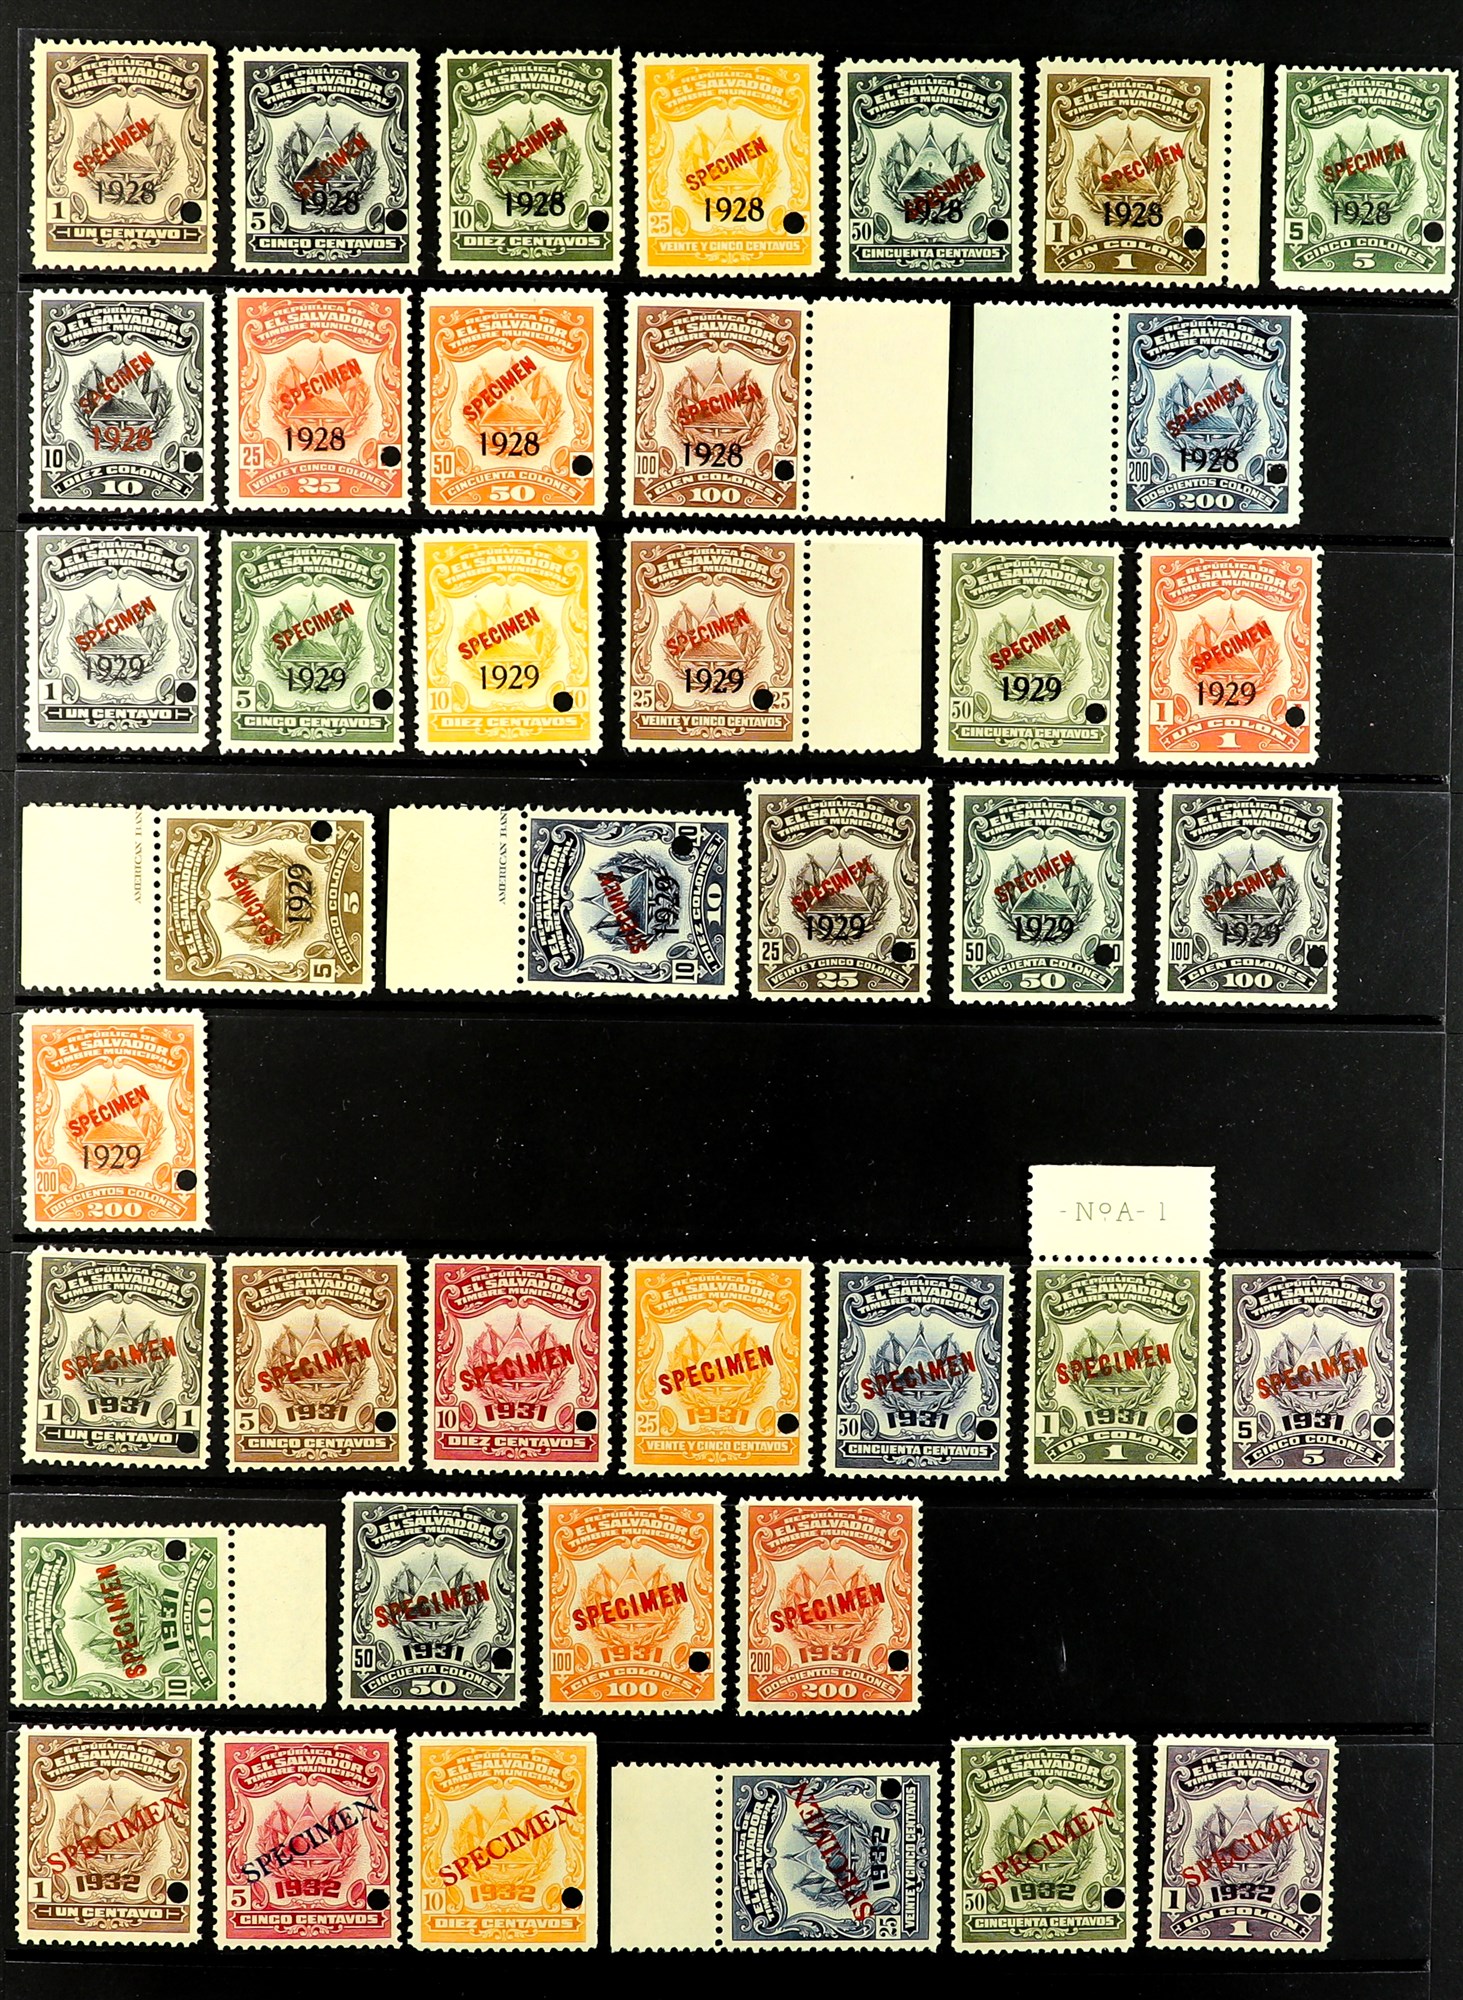 EL SALVADOR 1918 - 1933 'TIMBRE MUNICIPAL' REVENUE STAMPS collection of 180+ never hinged mint - Image 4 of 5